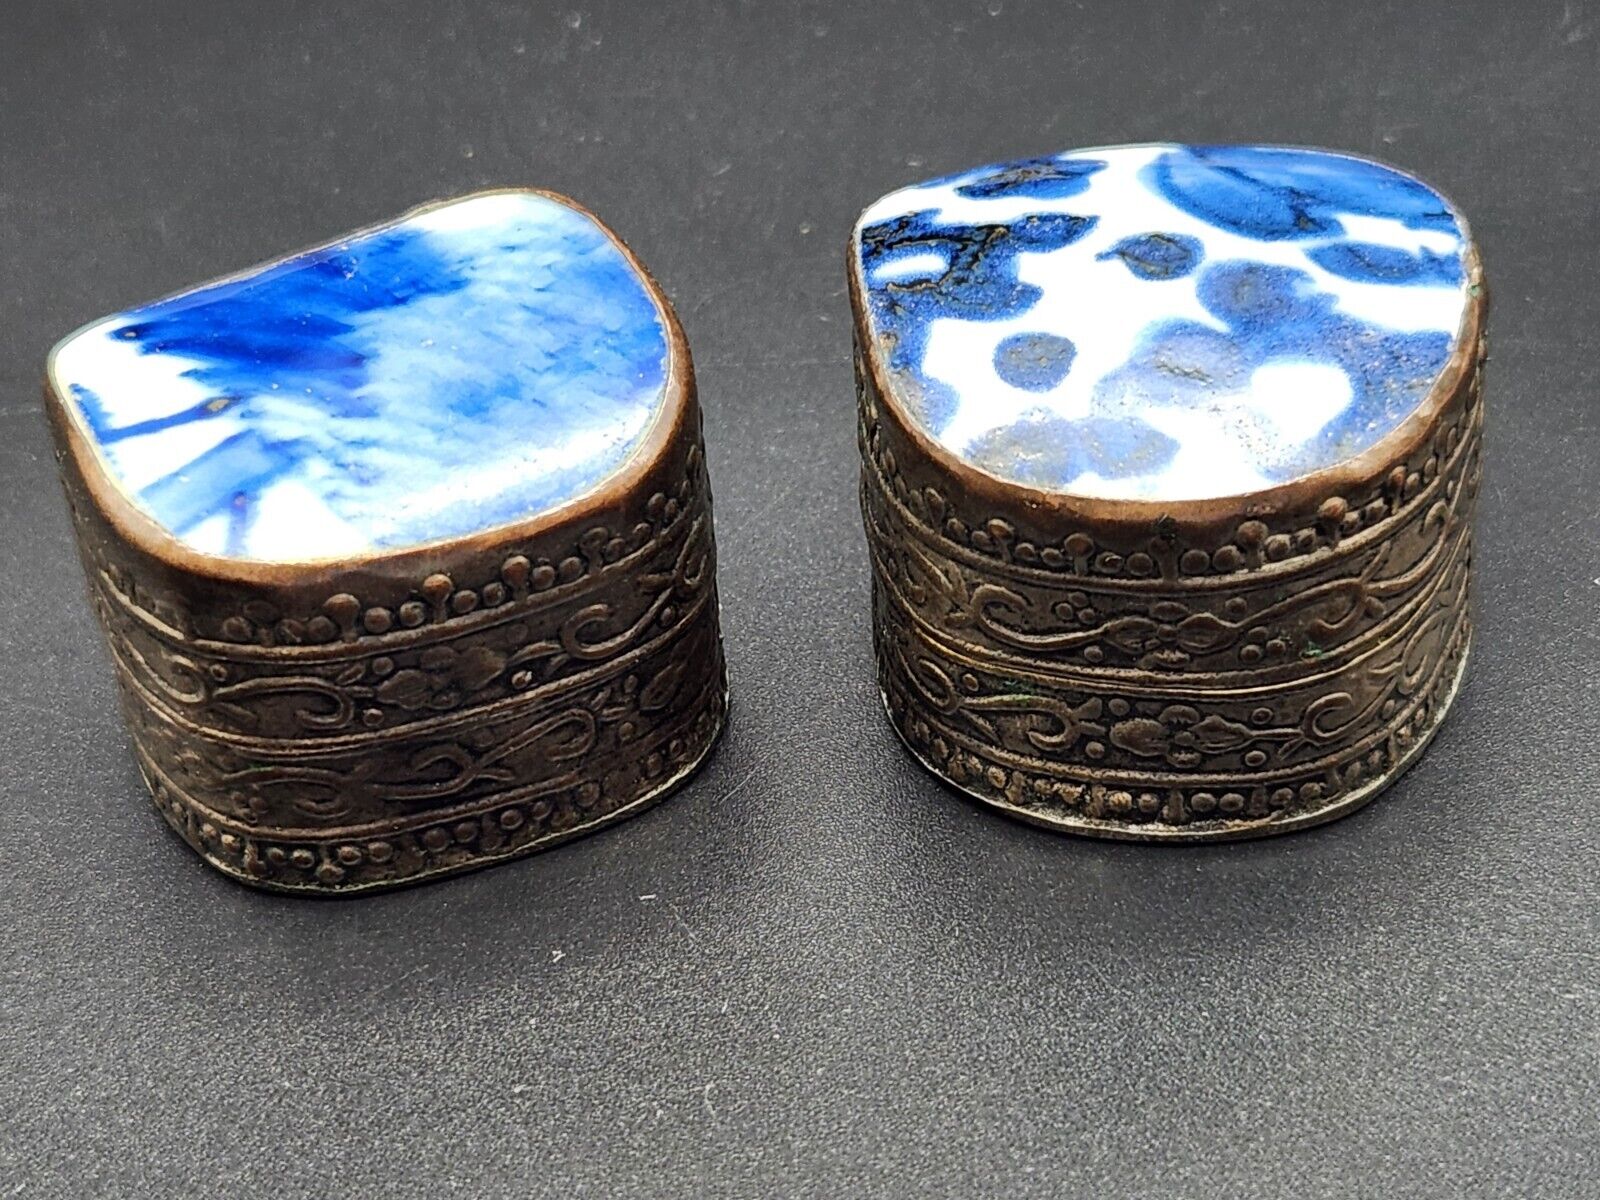 2 Vintage Chineese Blue and White Porcelain Trinket Boxes